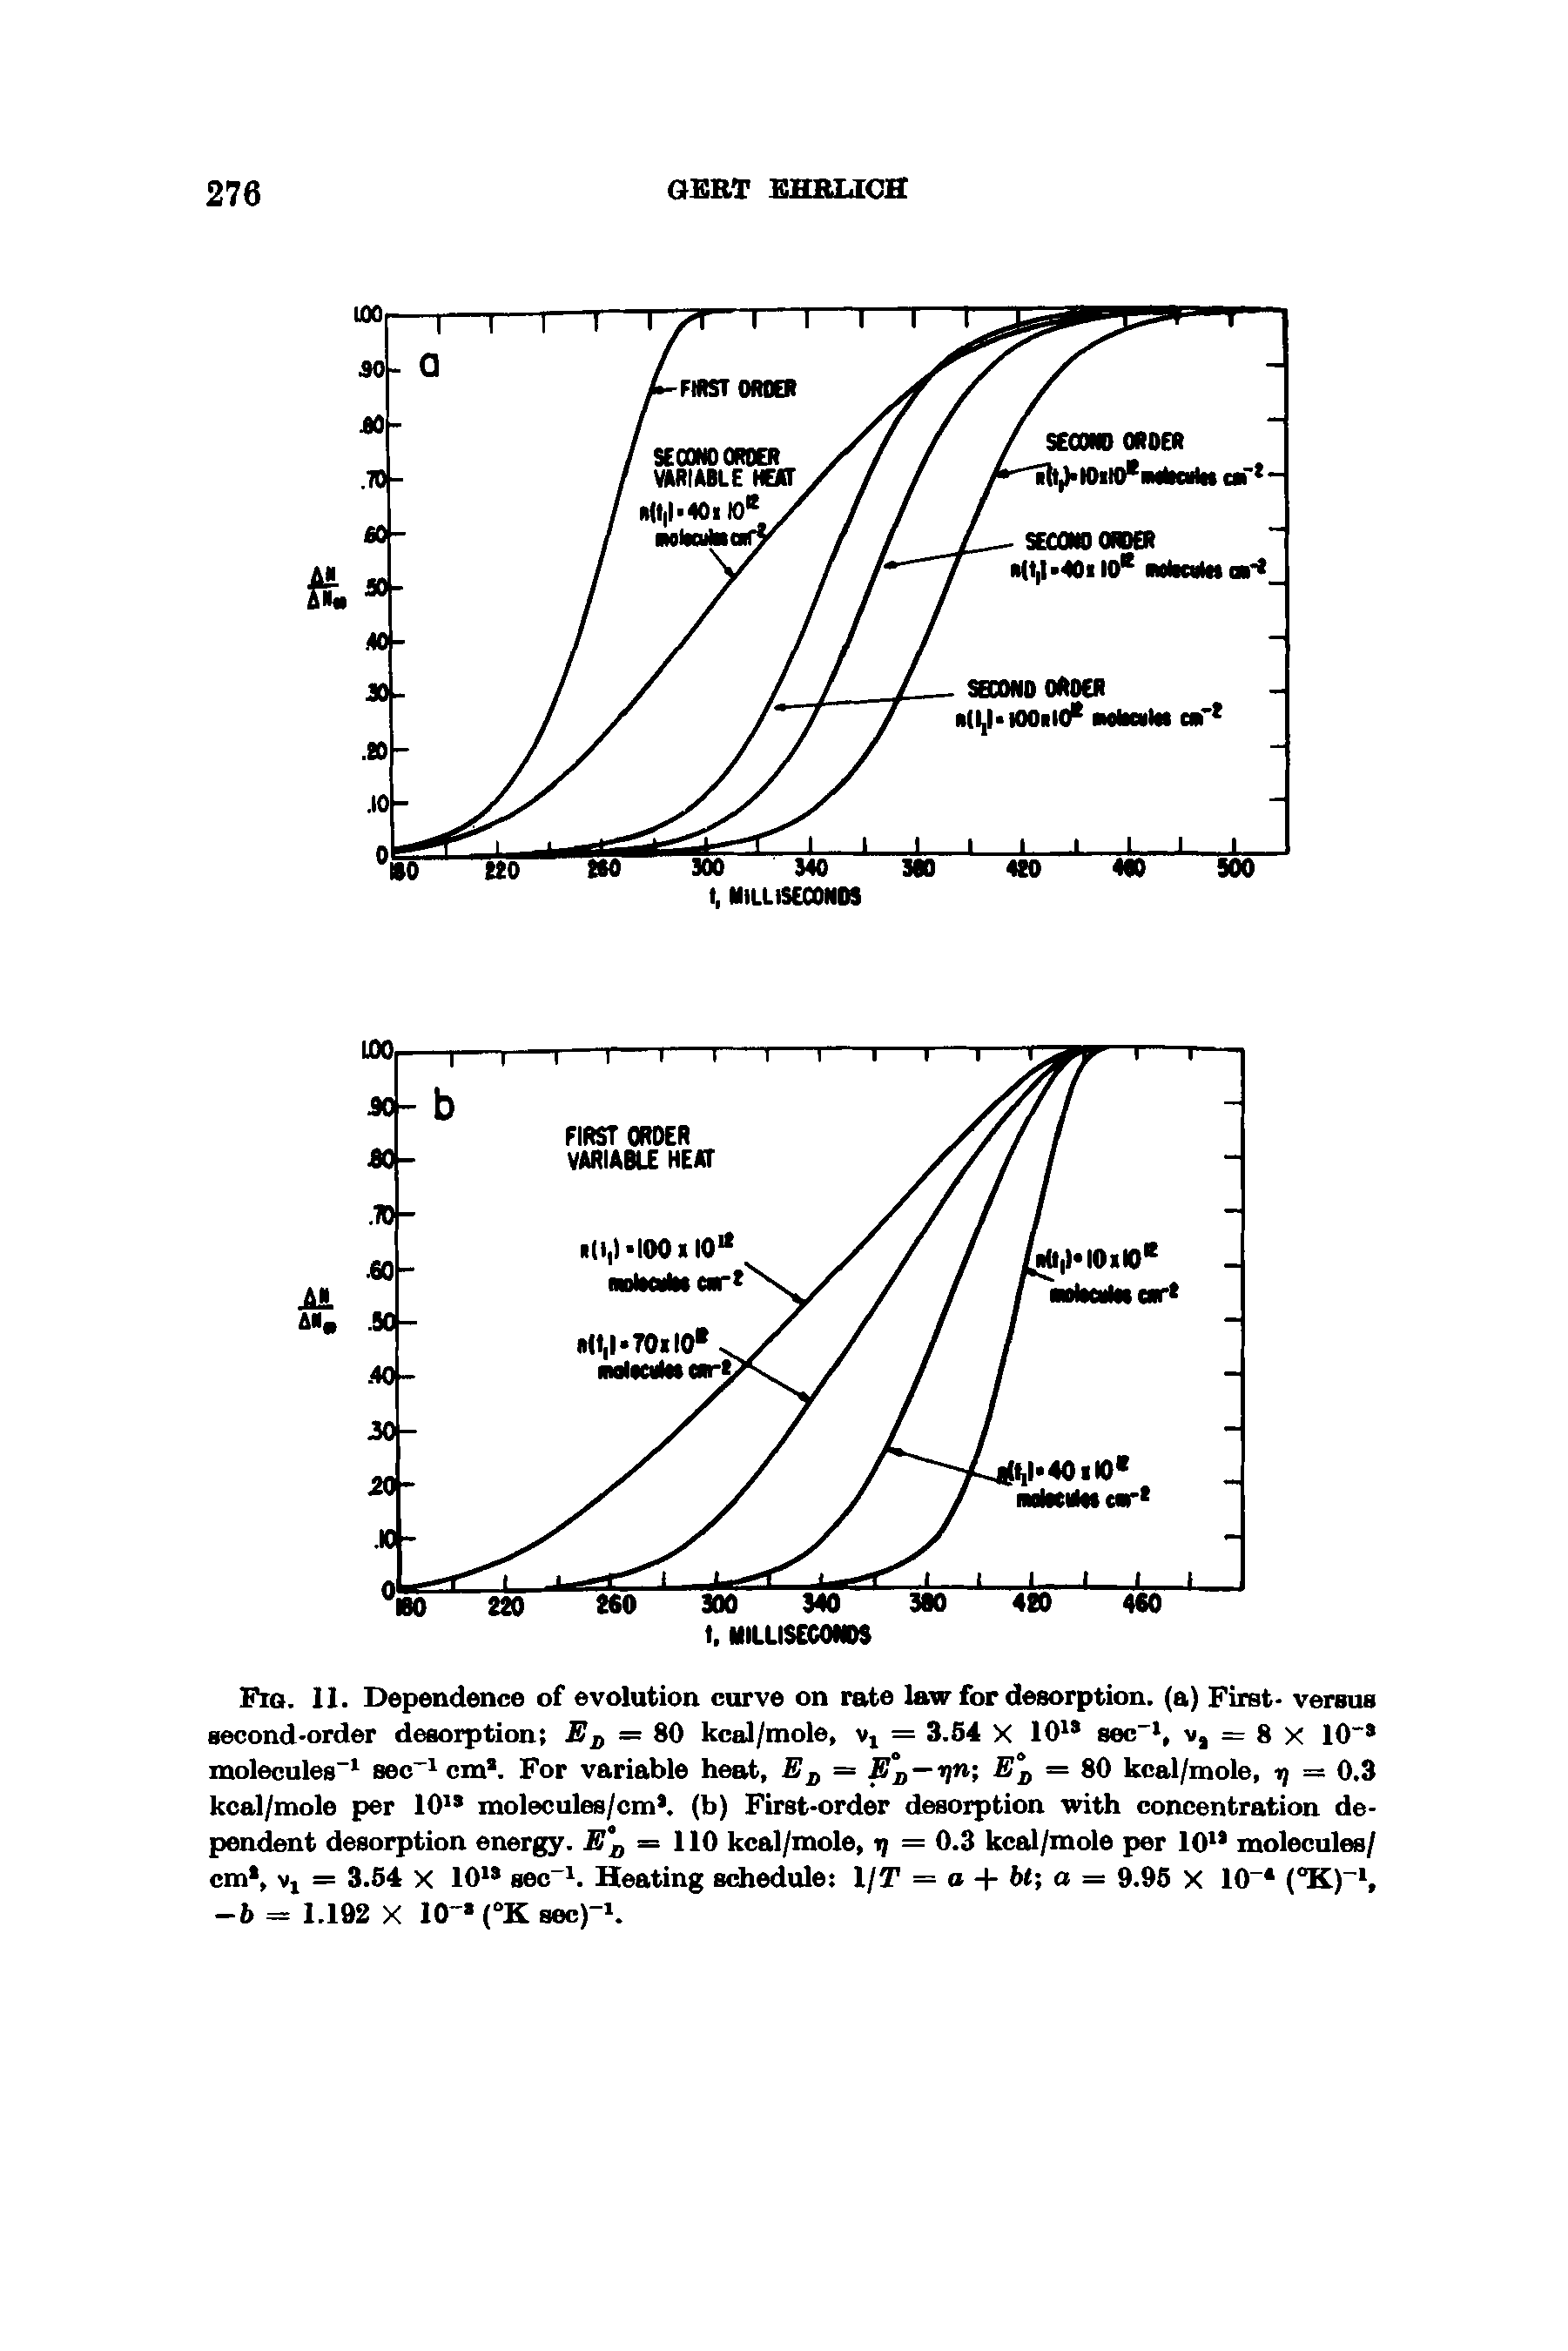 Fig. 11. Dependence of evolution curve on rate law for desorption, (a) First- versus second-order desorption E D = 80 kcal/mole, v, = 3.54 X 101 sec-1, v, = 8 X 10" molecules-1 sec-1 cm. For variable heat, ED = E°B — ifn E°D = 80 kcal/mole, ij = 0.3 kcal/mole per 10,s molecules/cm. (b) First-order desorption with concentration dependent desorption energy. E B = 110 kcal/mole, ij = 0.3 kcal/mole per 10u molecules/ cm, v, = 3.54 x 10 sec-1. Heating schedule 1/T = a + bt a = 9.95 X 10- (°K)-1, -b = 1.192 X 10- (°K sec)-1.